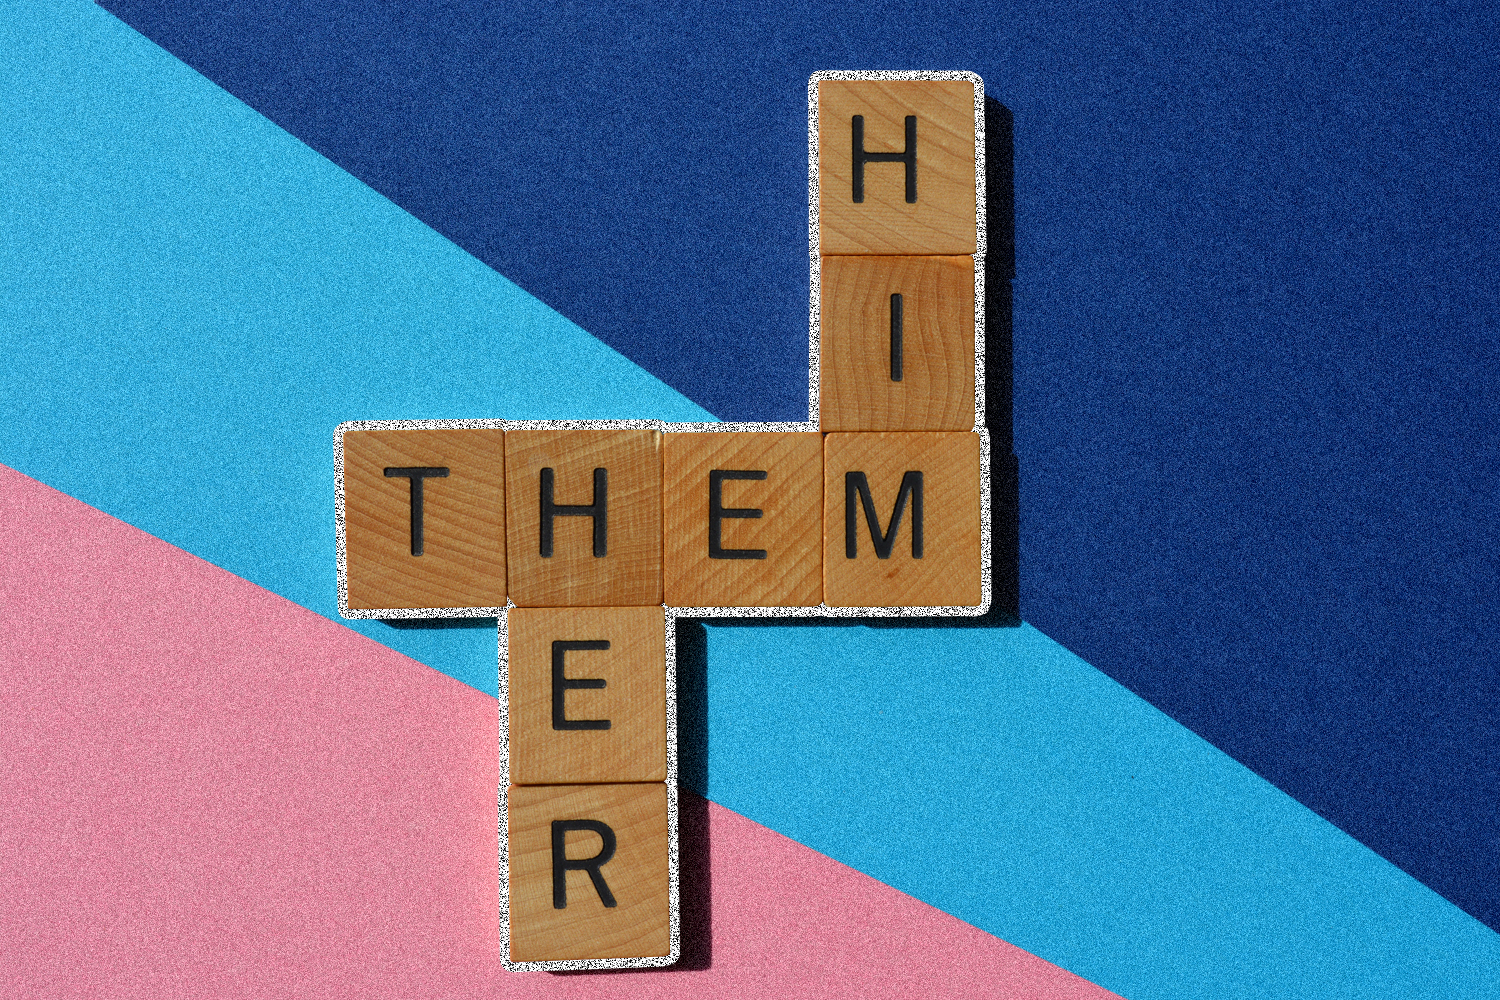 Wooden blocks with letters on them, placed together to spell "THEM," "HIM," and "HER.